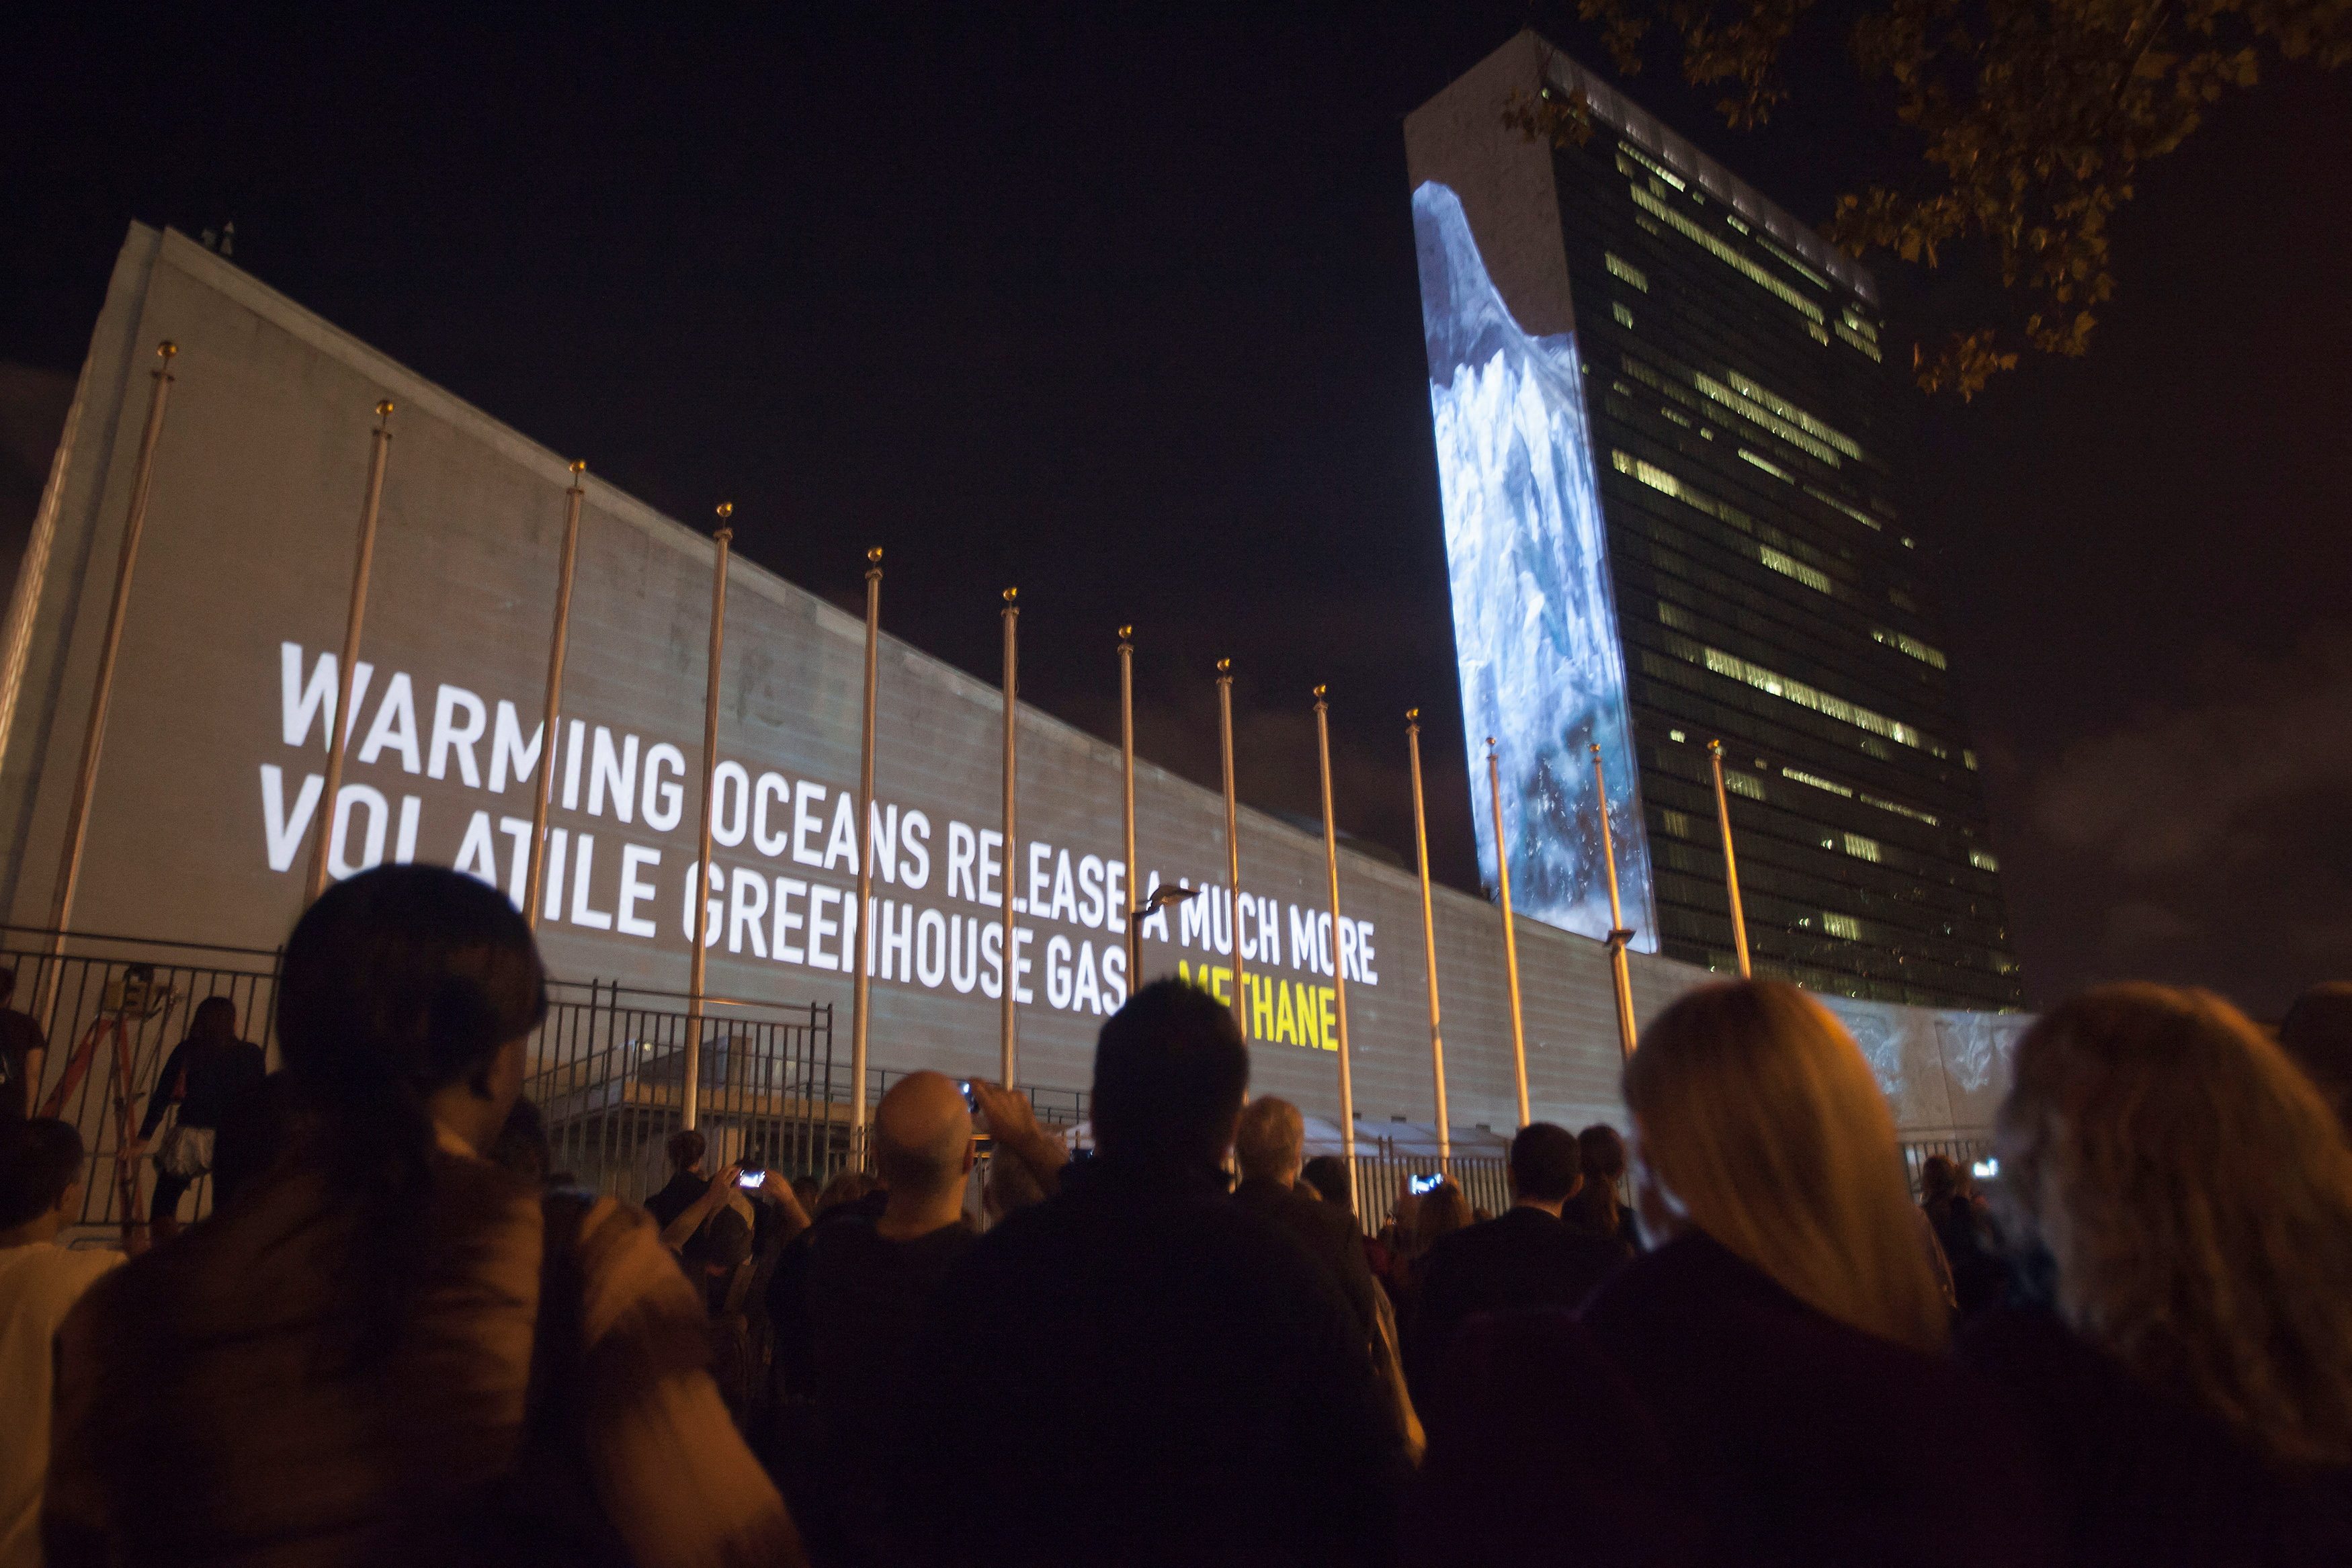 Messages on methane gas and carbon dioxide emissions are projected onto the U.N. building ahead of climate change talks in New York